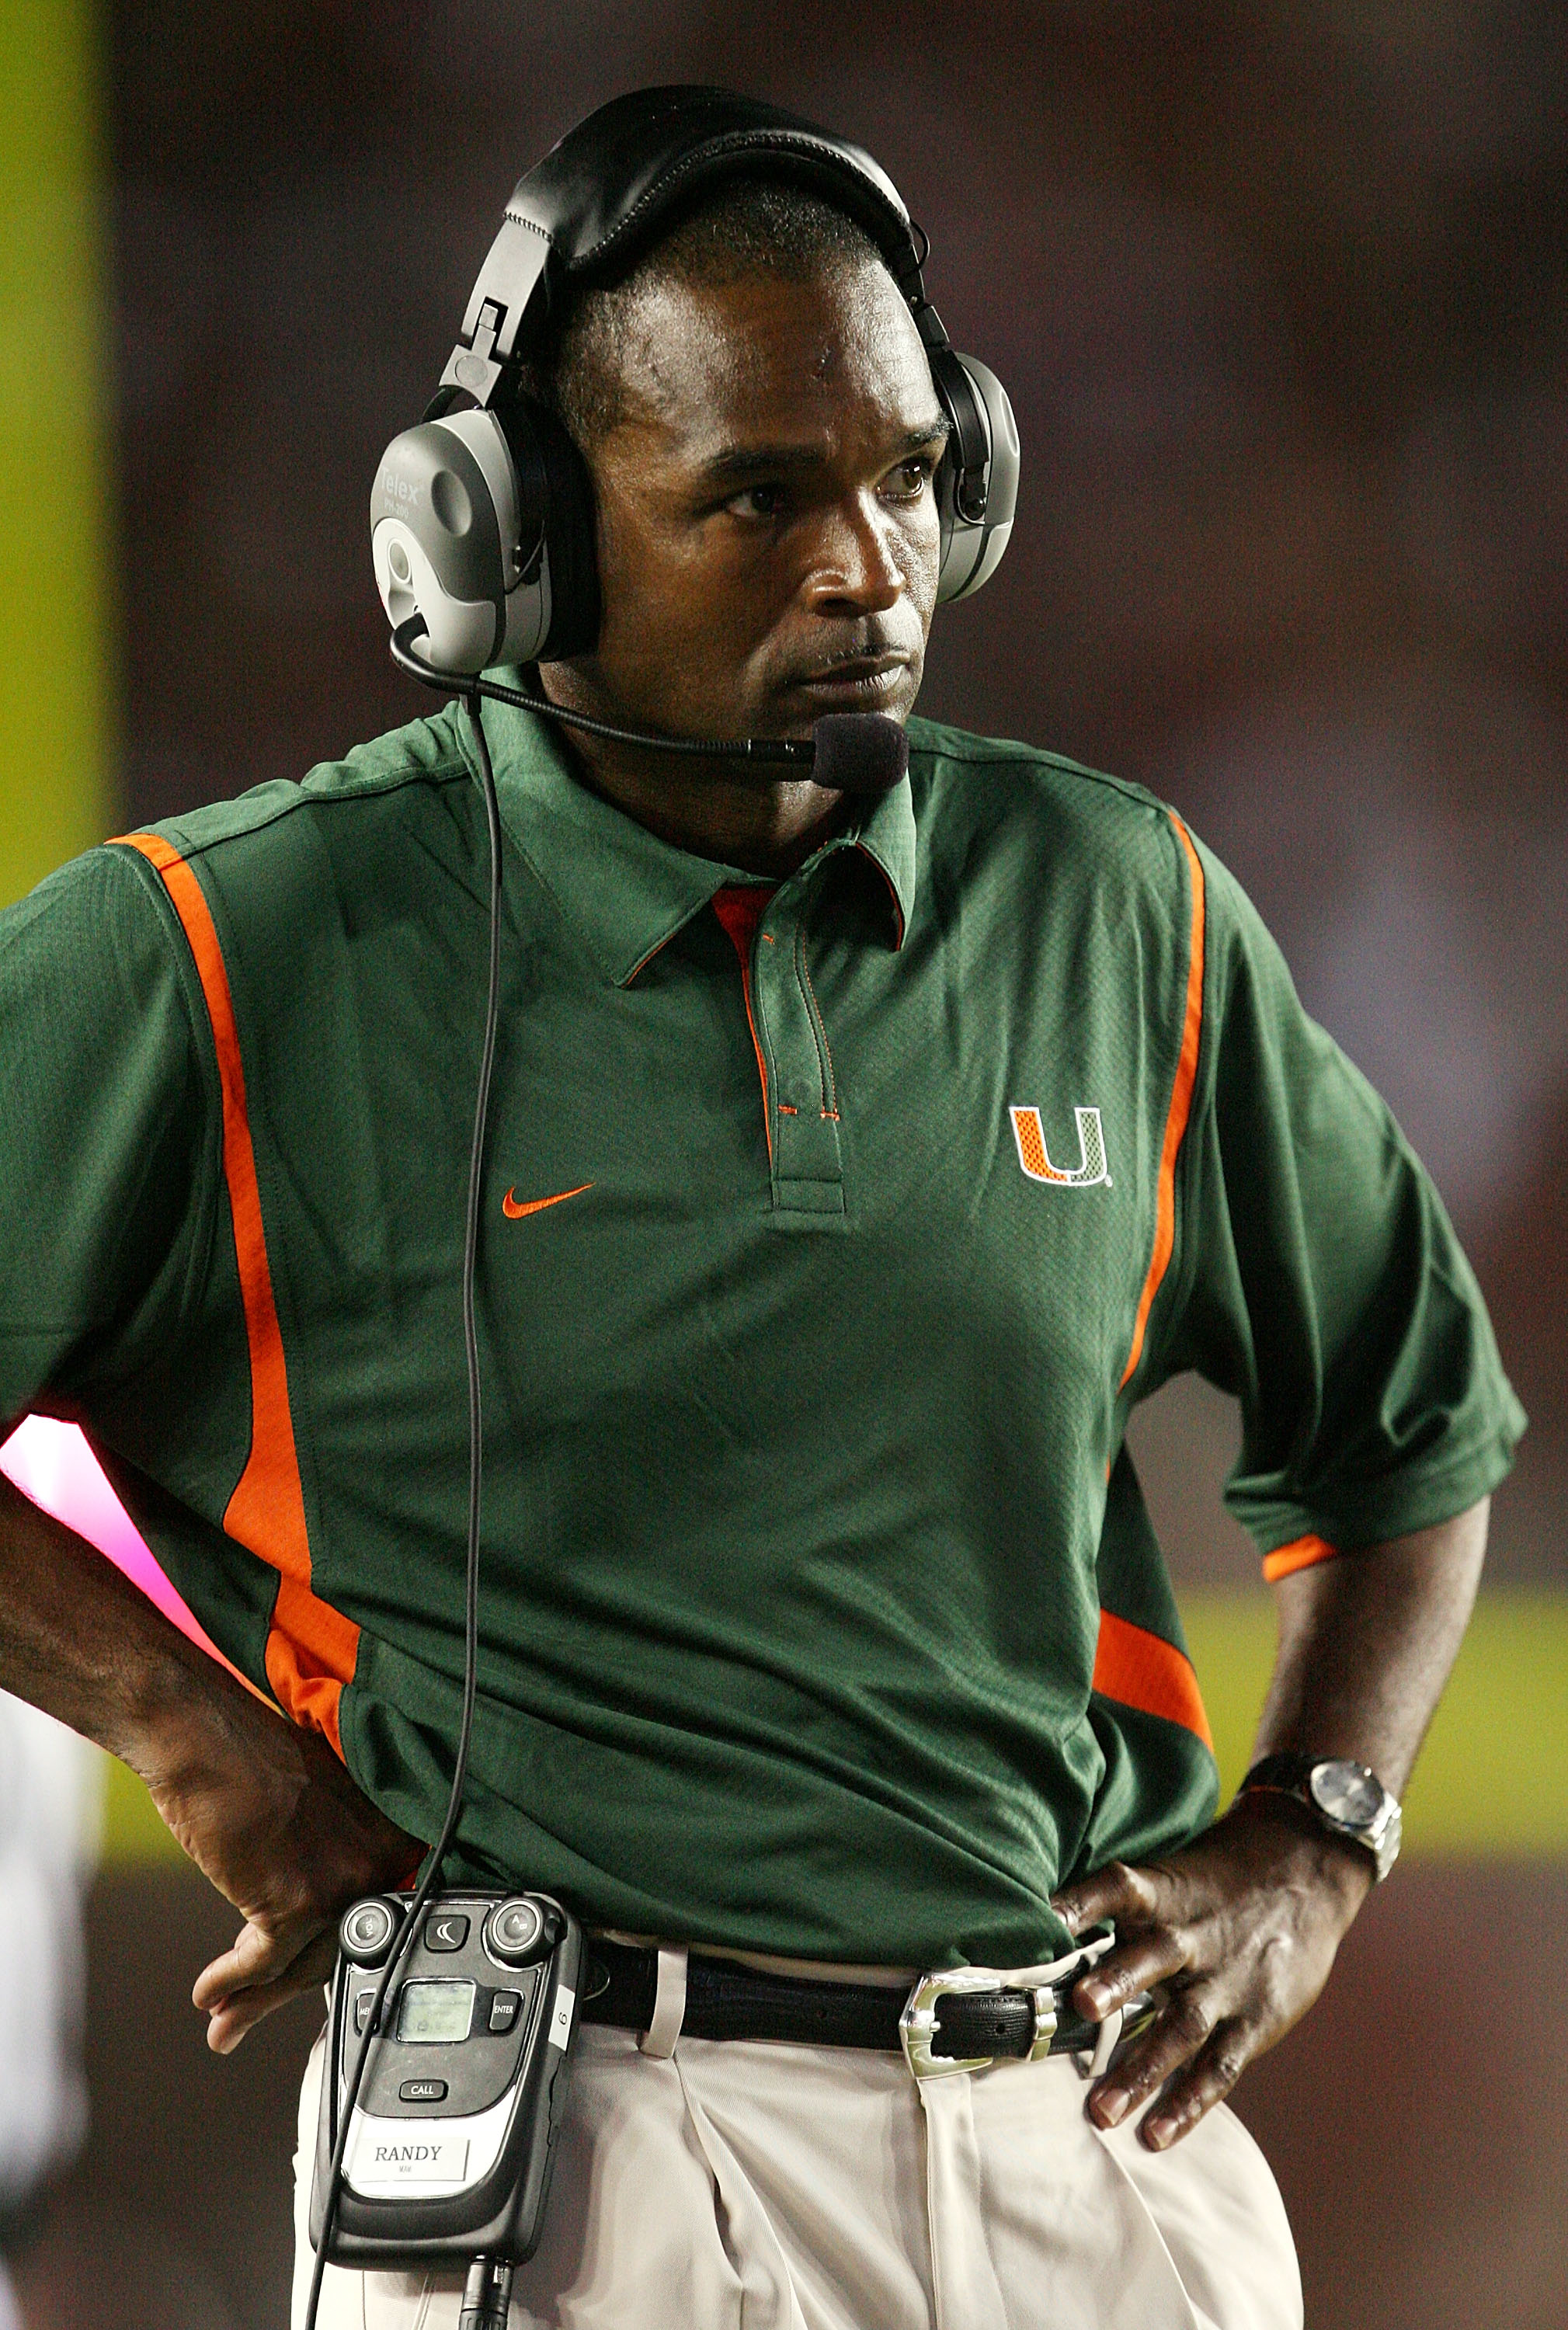 TALLAHASSEE, FL - SEPTEMBER 07:  Head coach Randy Shannon of the Miami Hurricanes watches his team take on the Florida State Seminoles at Doak Campbell Stadium on September 7, 2009 in Tallahassee, Florida. Miami defeated Florida State 38-34.  (Photo by Do